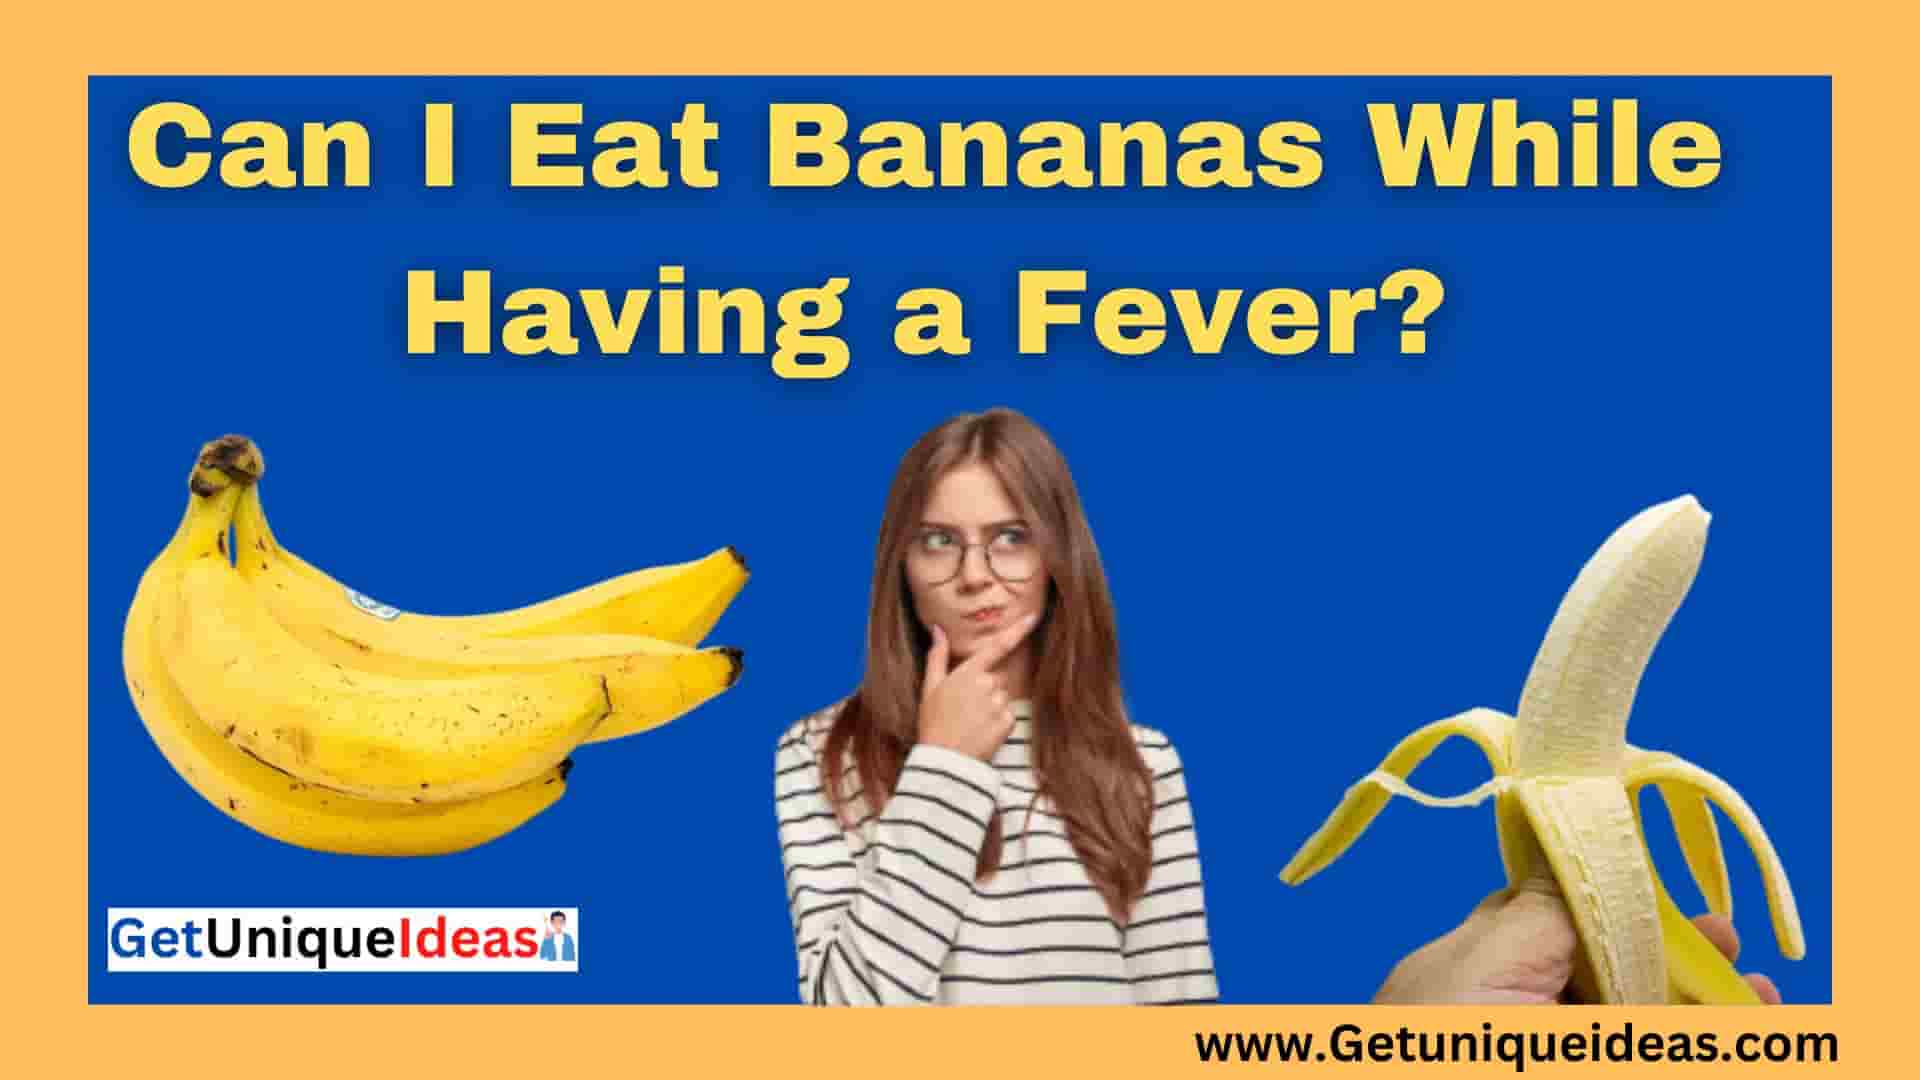 Can I Eat Bananas During a Fever?